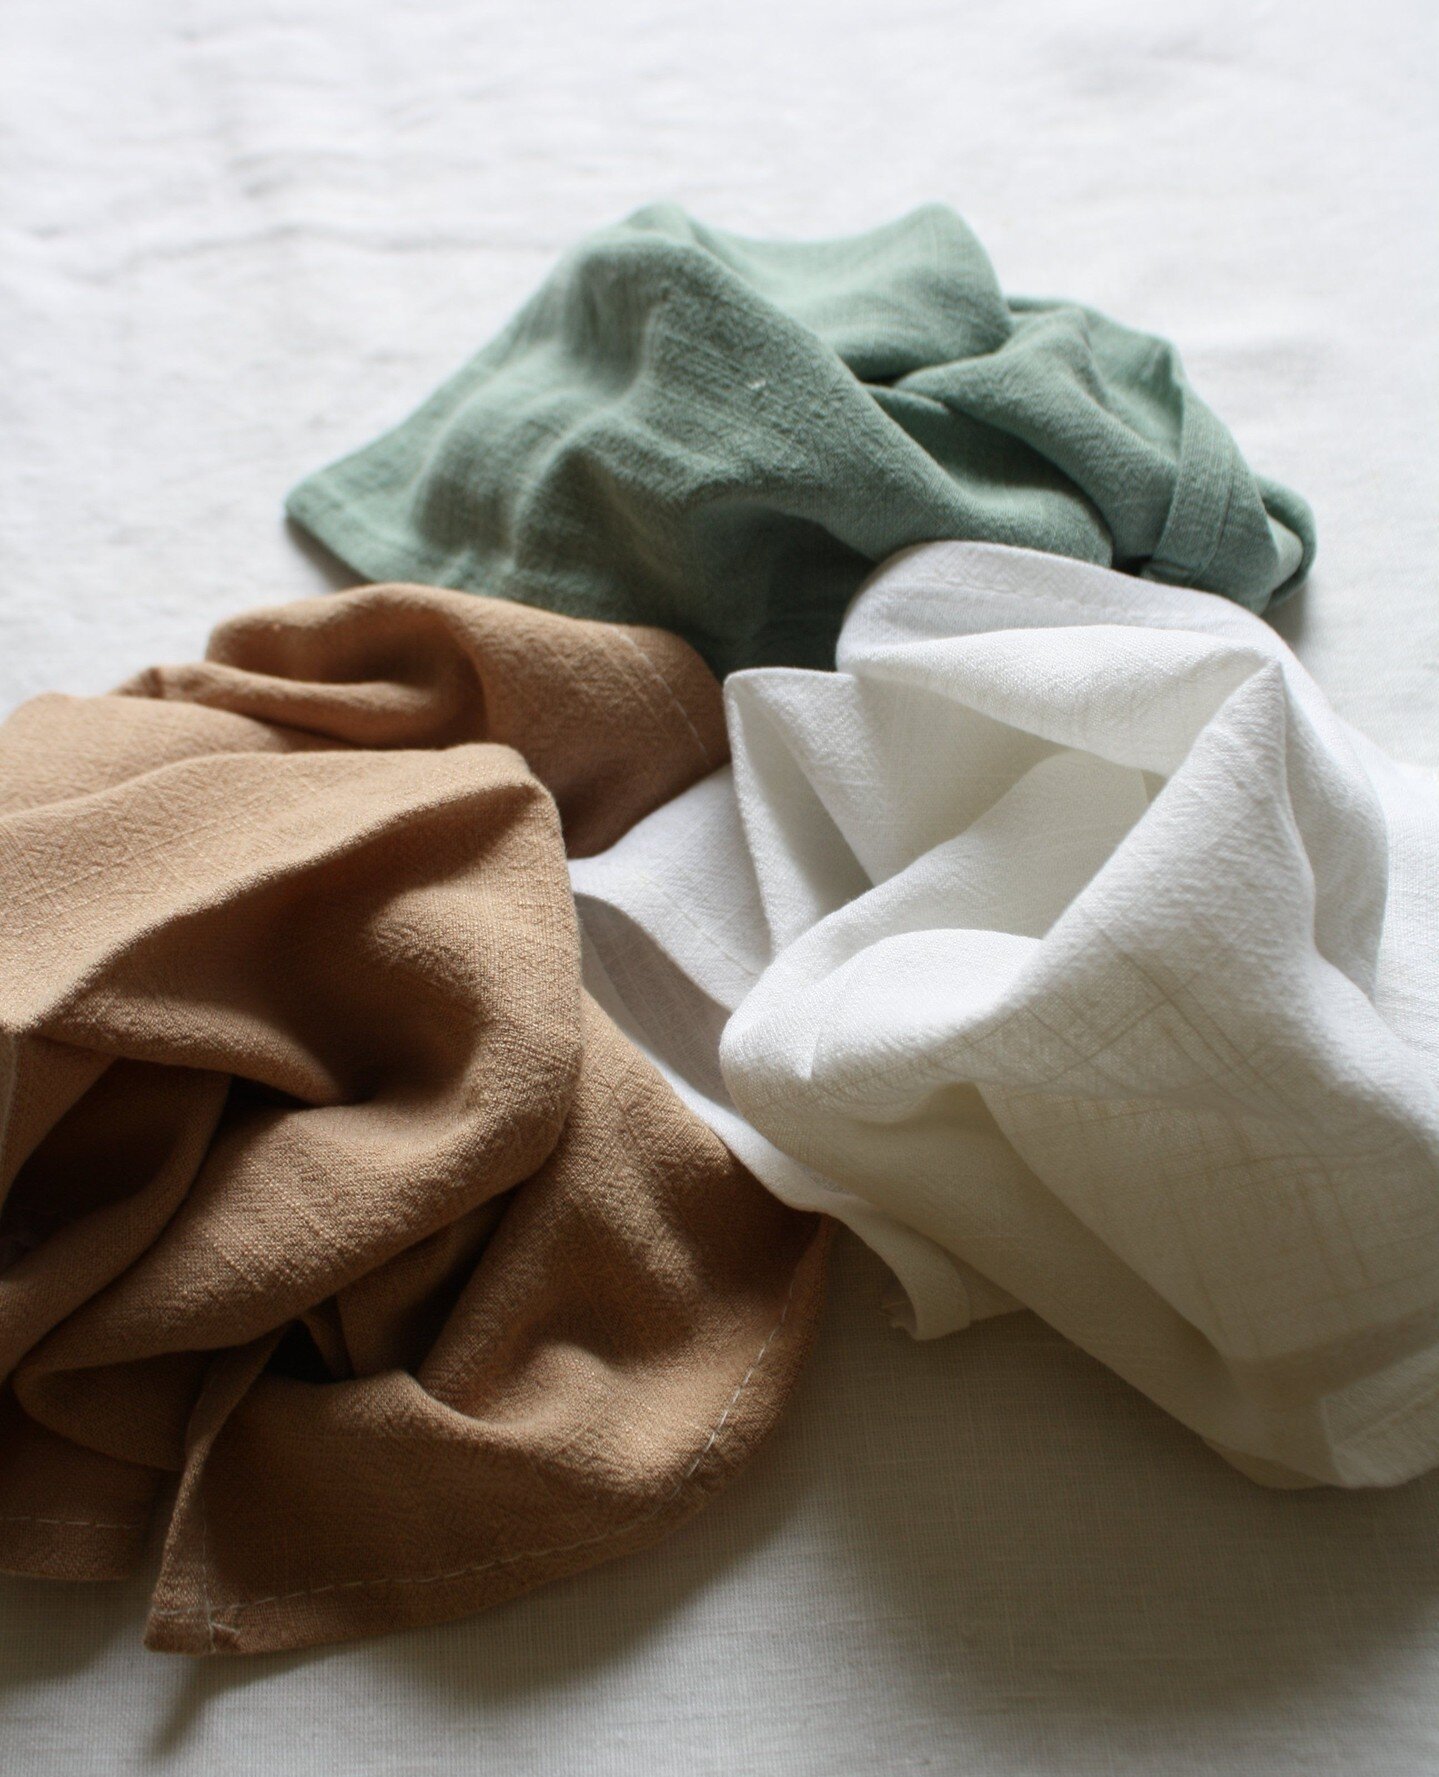 Easy breezy linen is always the perfect choice for warm weather and coastal living.